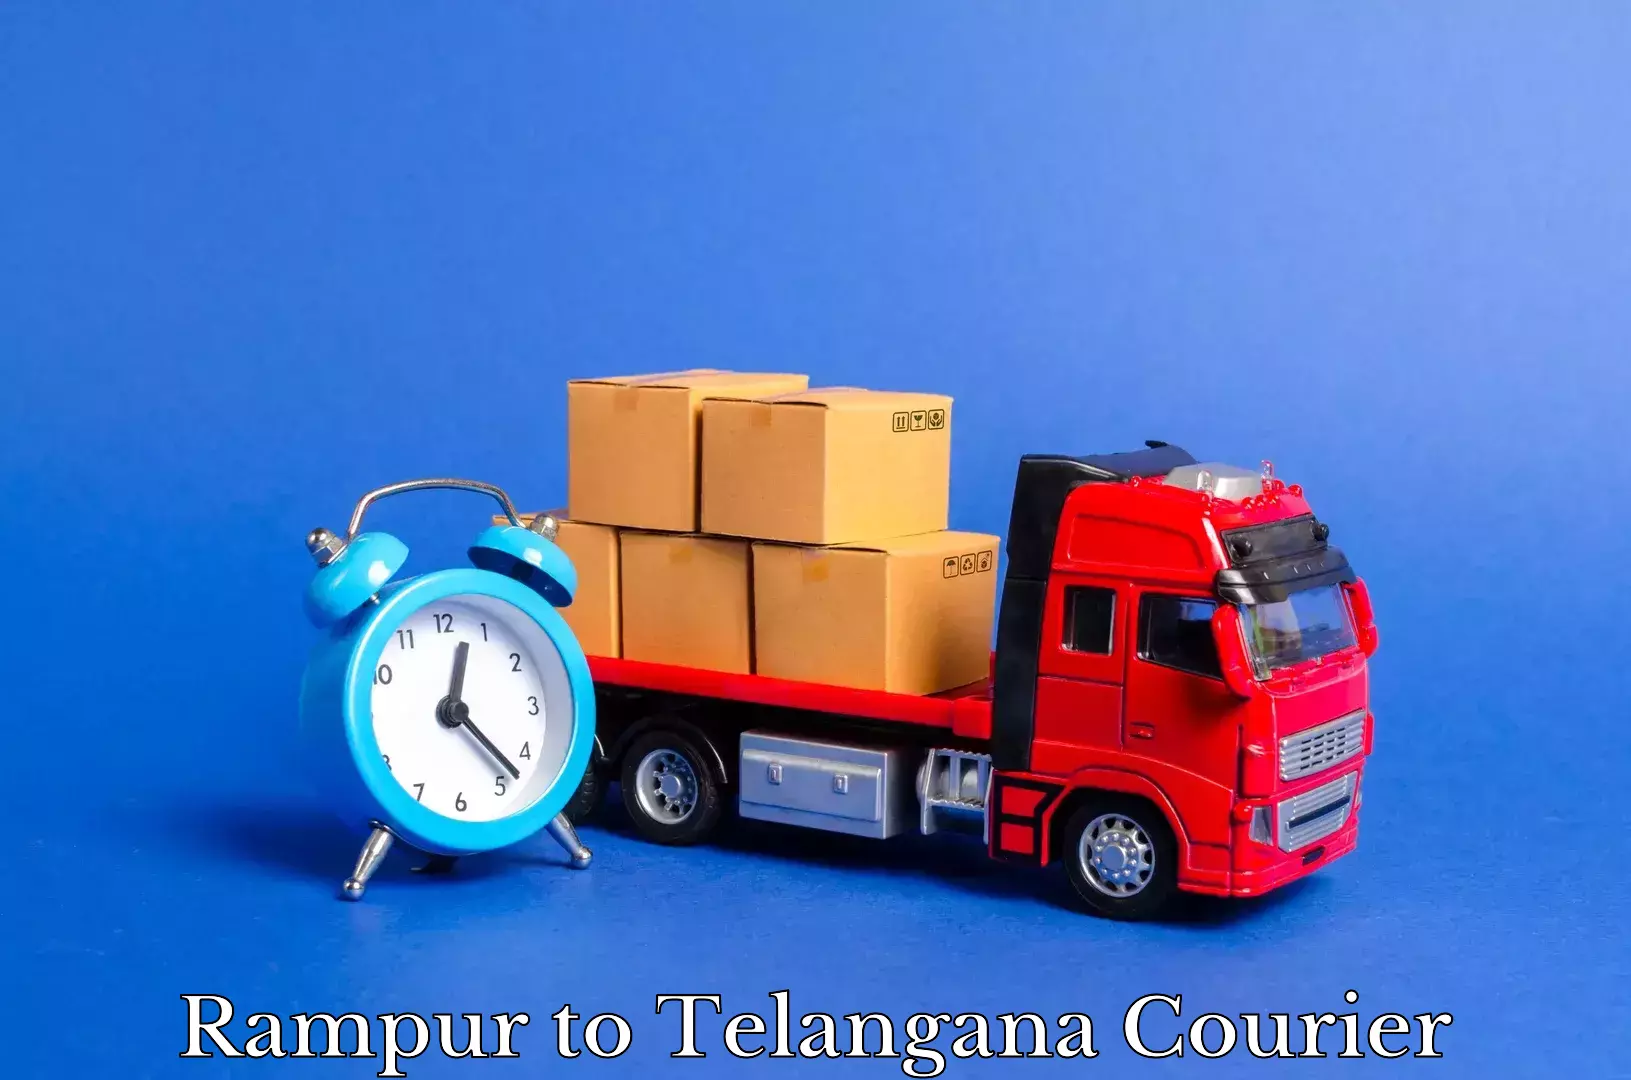 Expert household relocation Rampur to Nizamabad